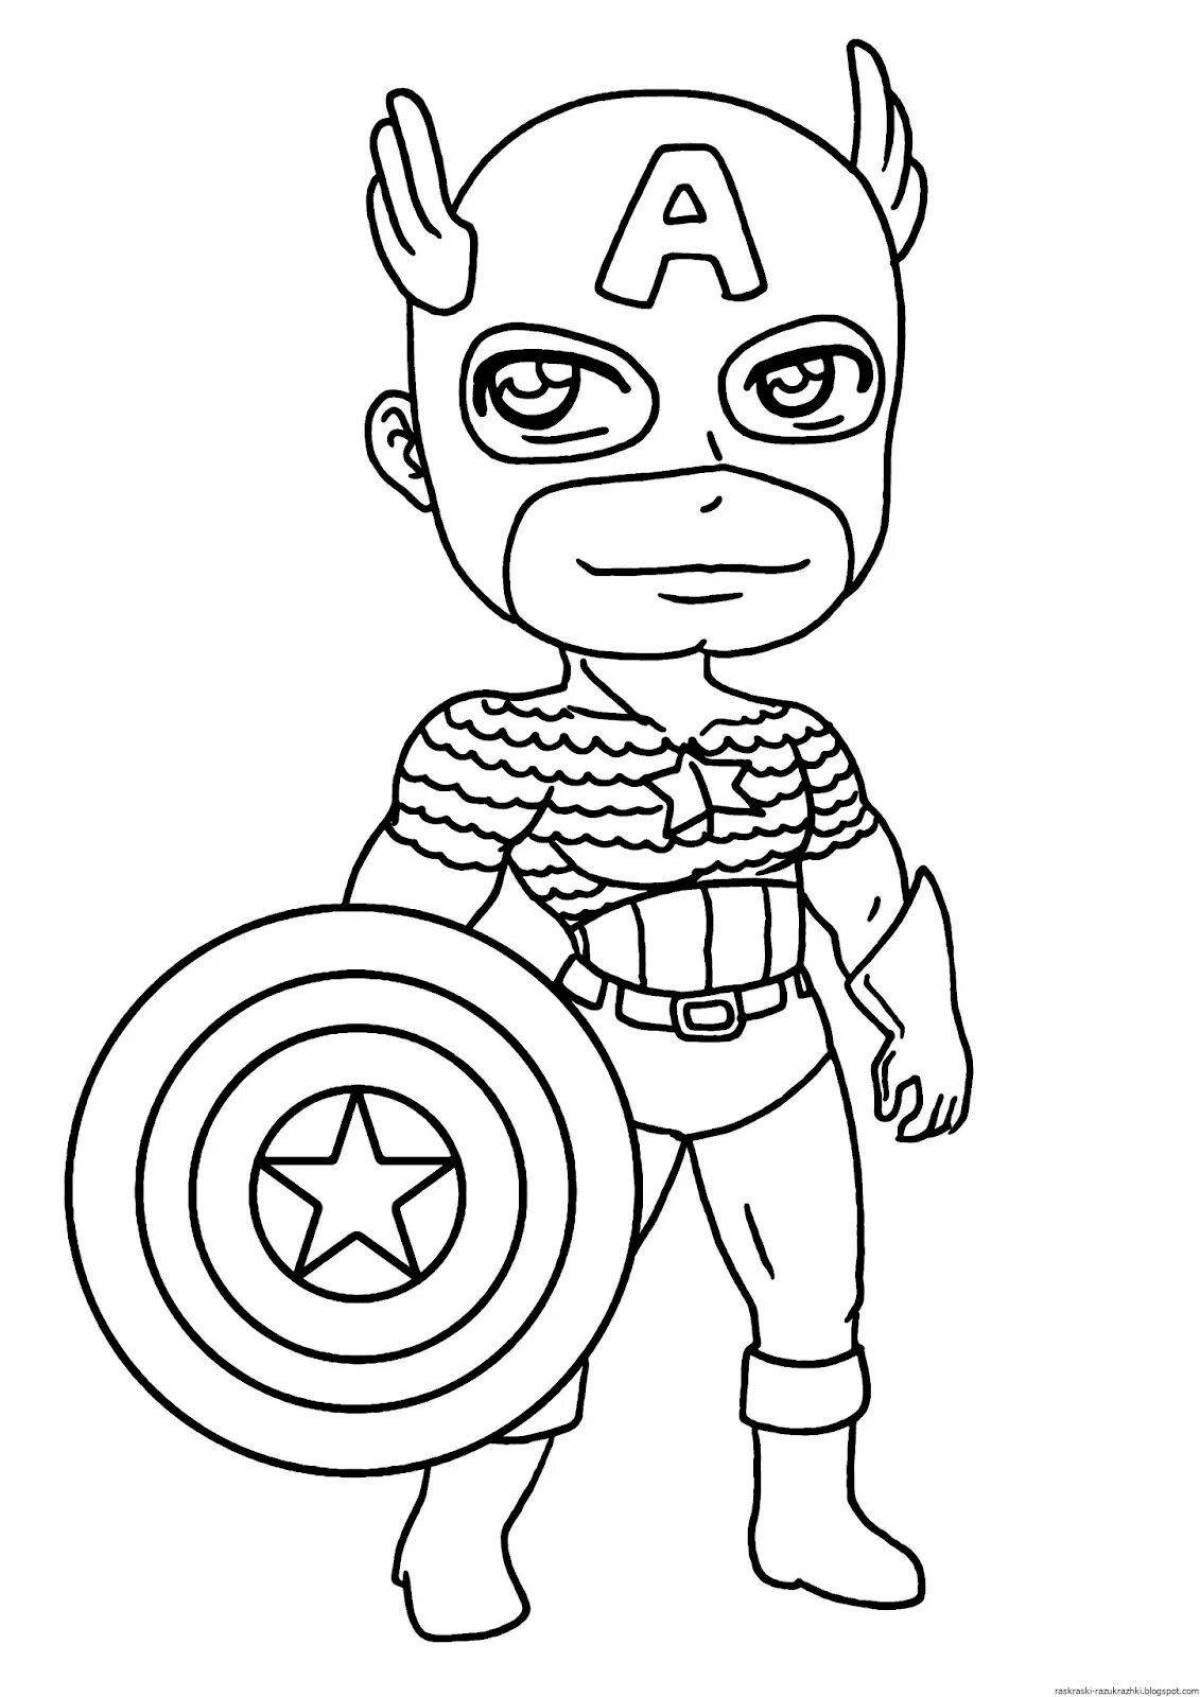 Bright coloring marvel heroes for kids